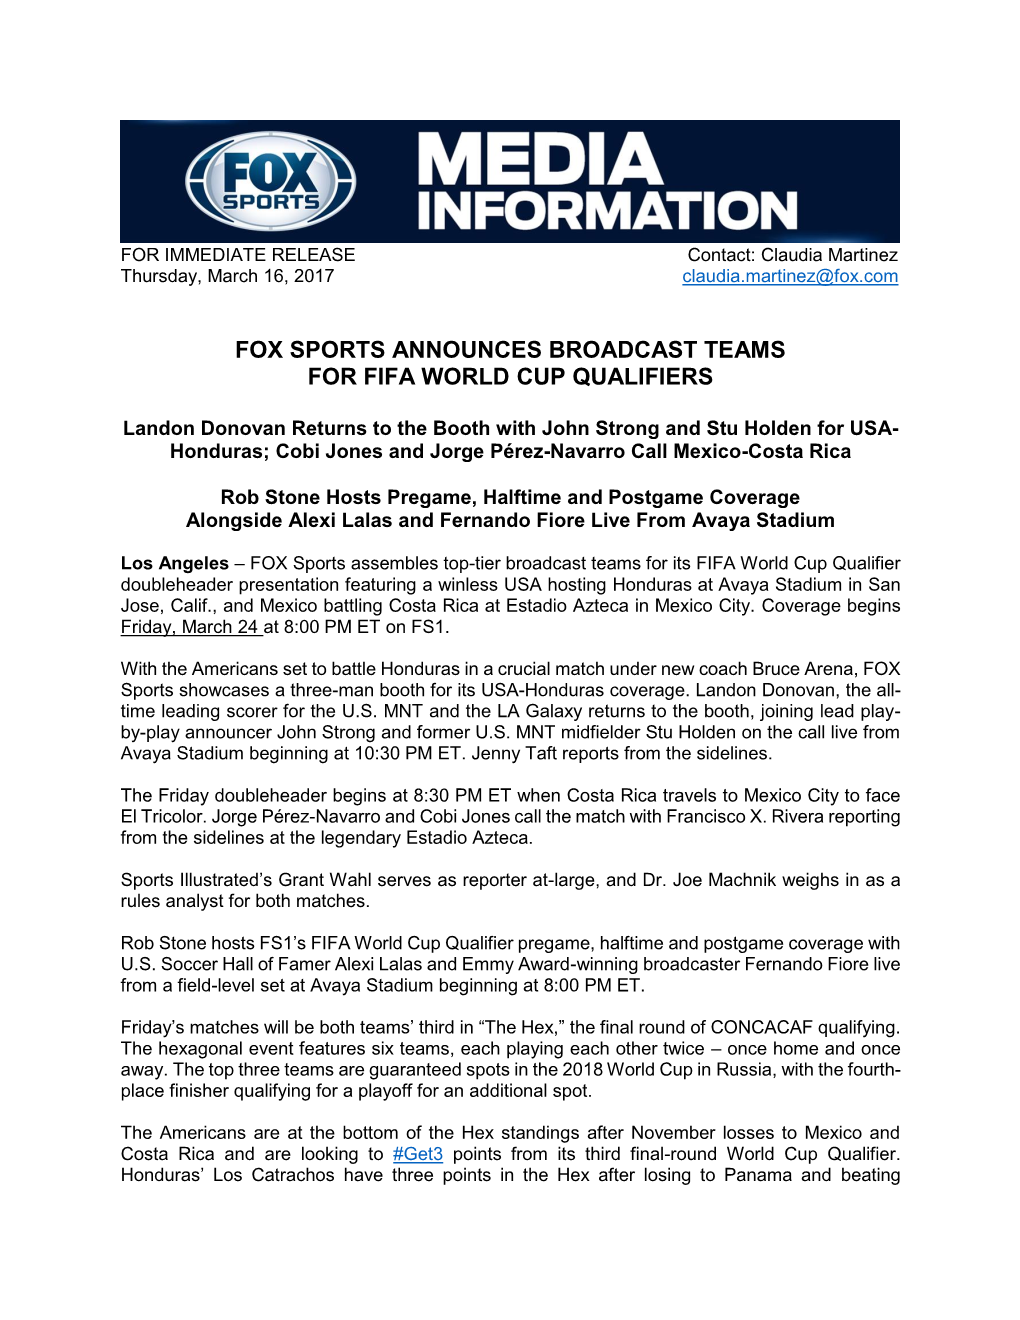 Fox Sports Announces Broadcast Teams for Fifa World Cup Qualifiers